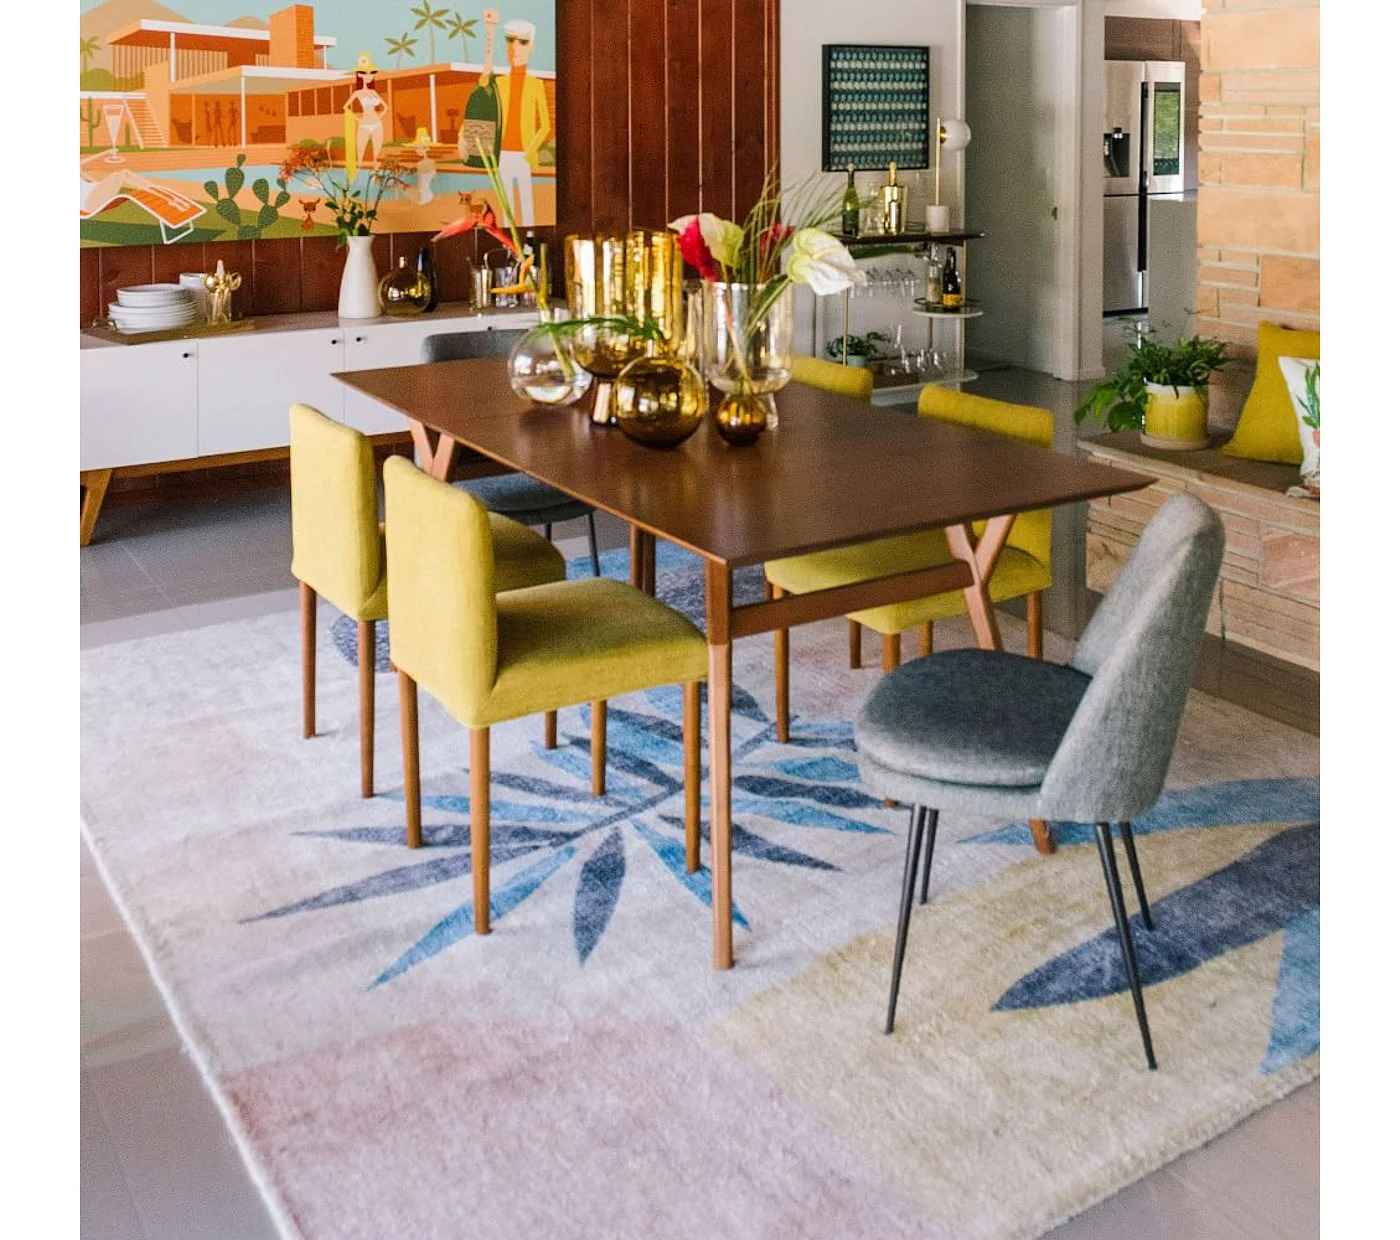 Id-Century Expandable Dining Table